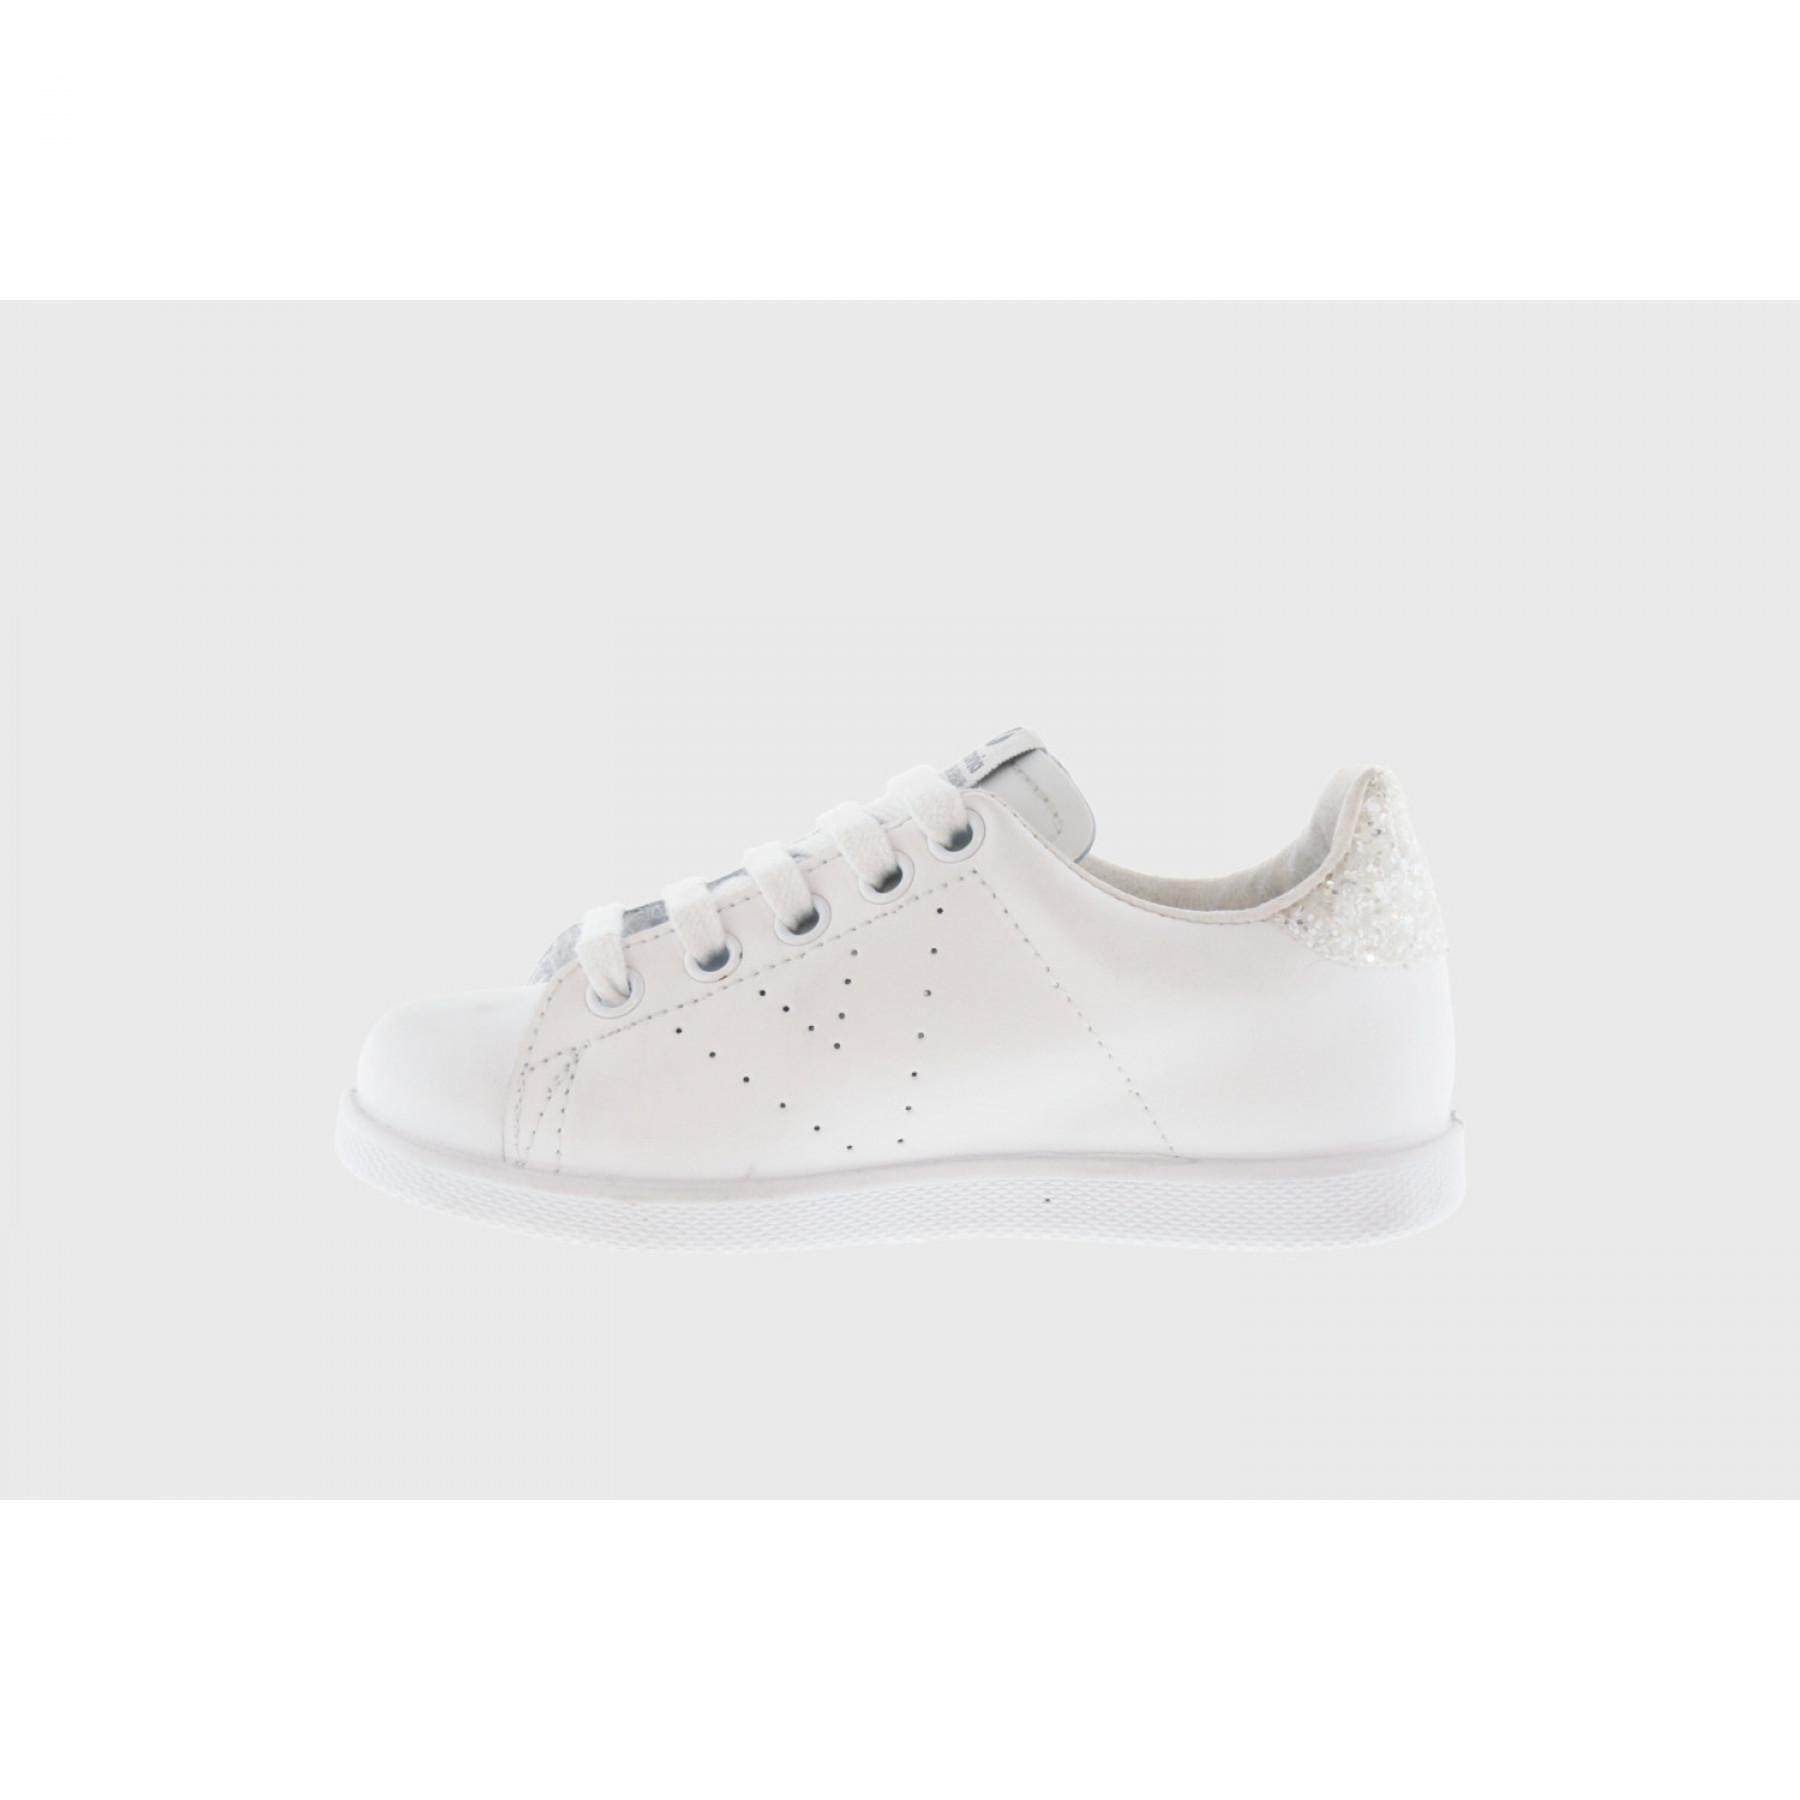 Leather shoes Victoria tennis